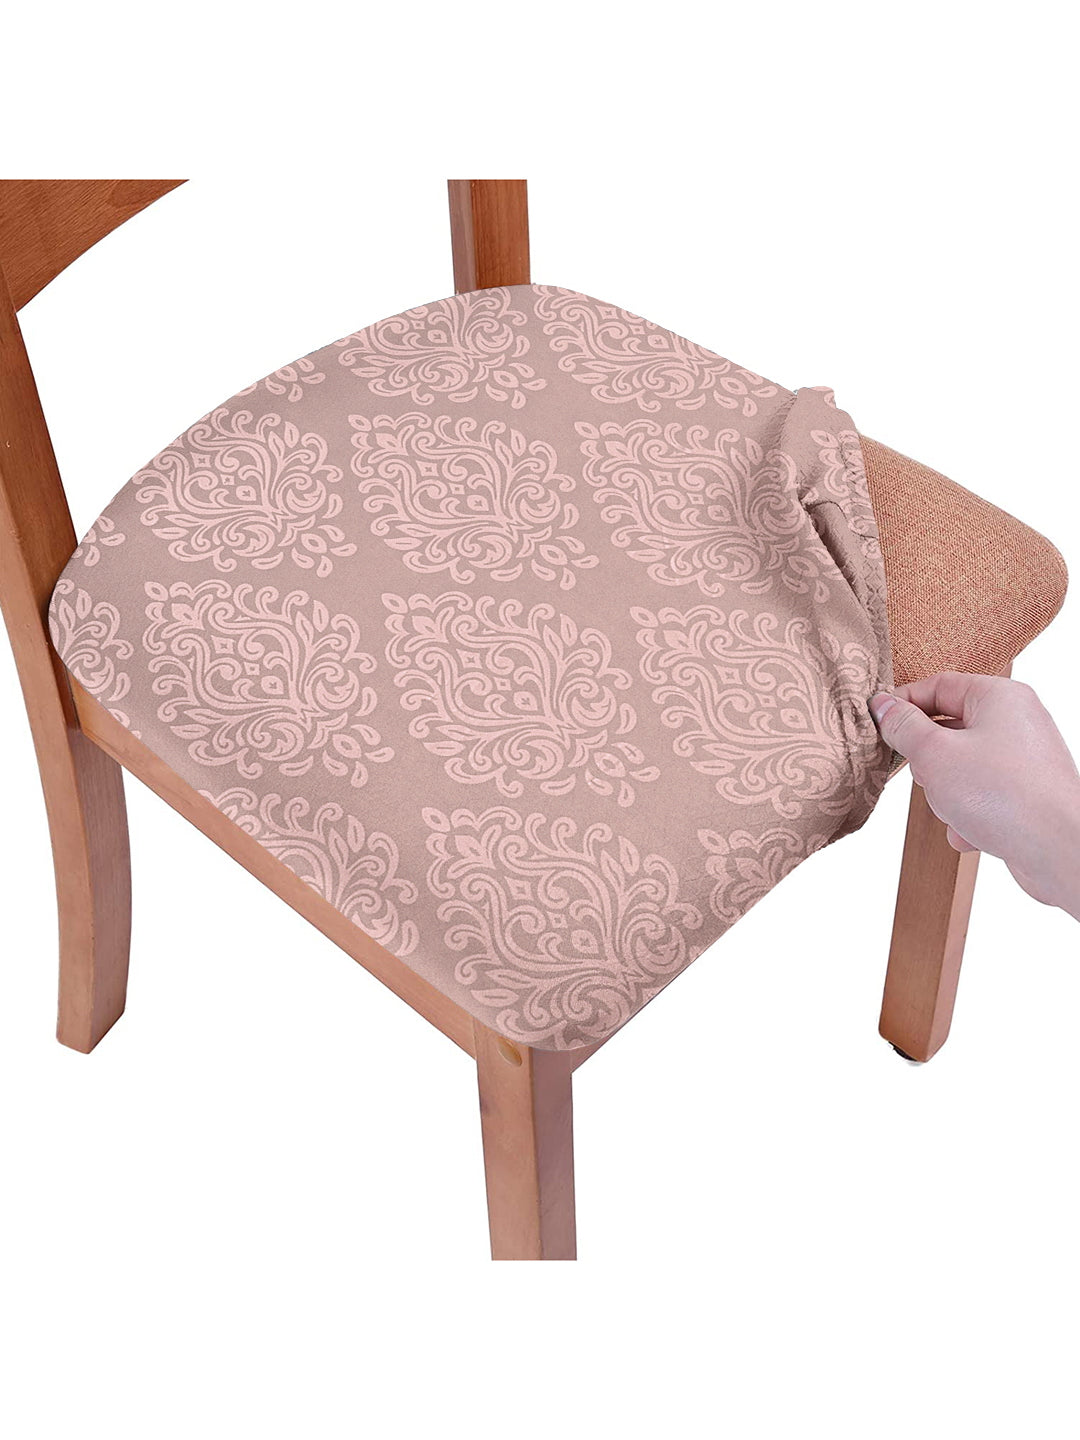 Stretchable Ethnic Printed Non Slip Chair Pad Cover Pack of 6- Pink